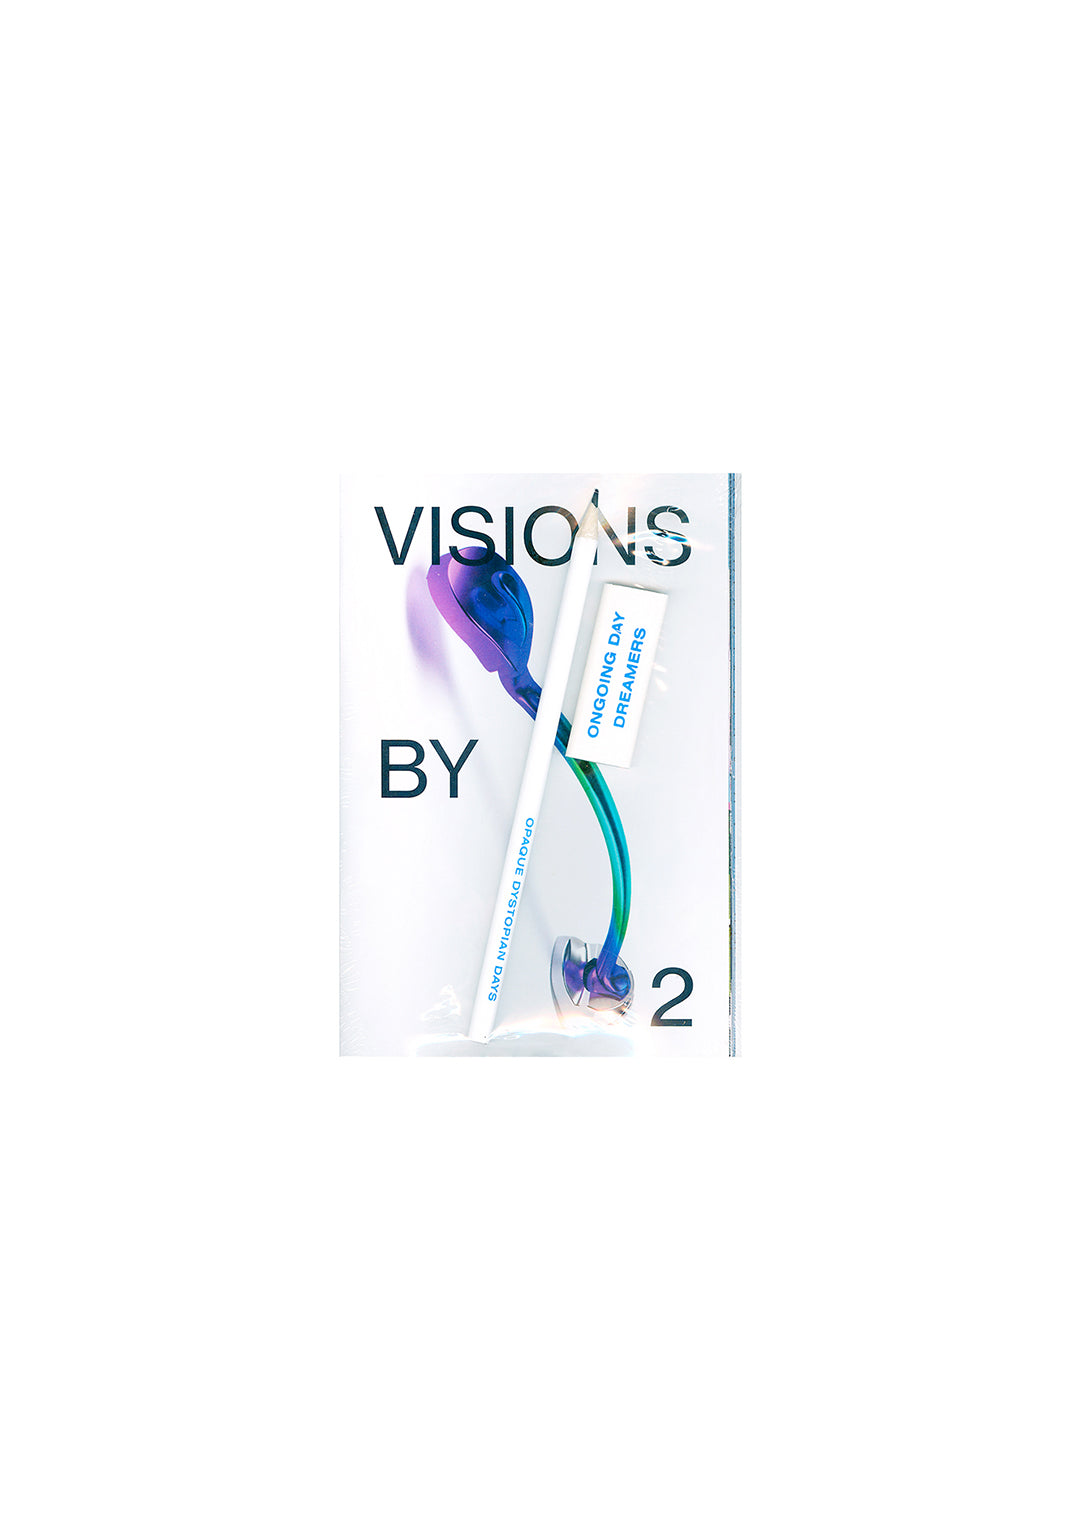 VISIONS BY Issue No. 2